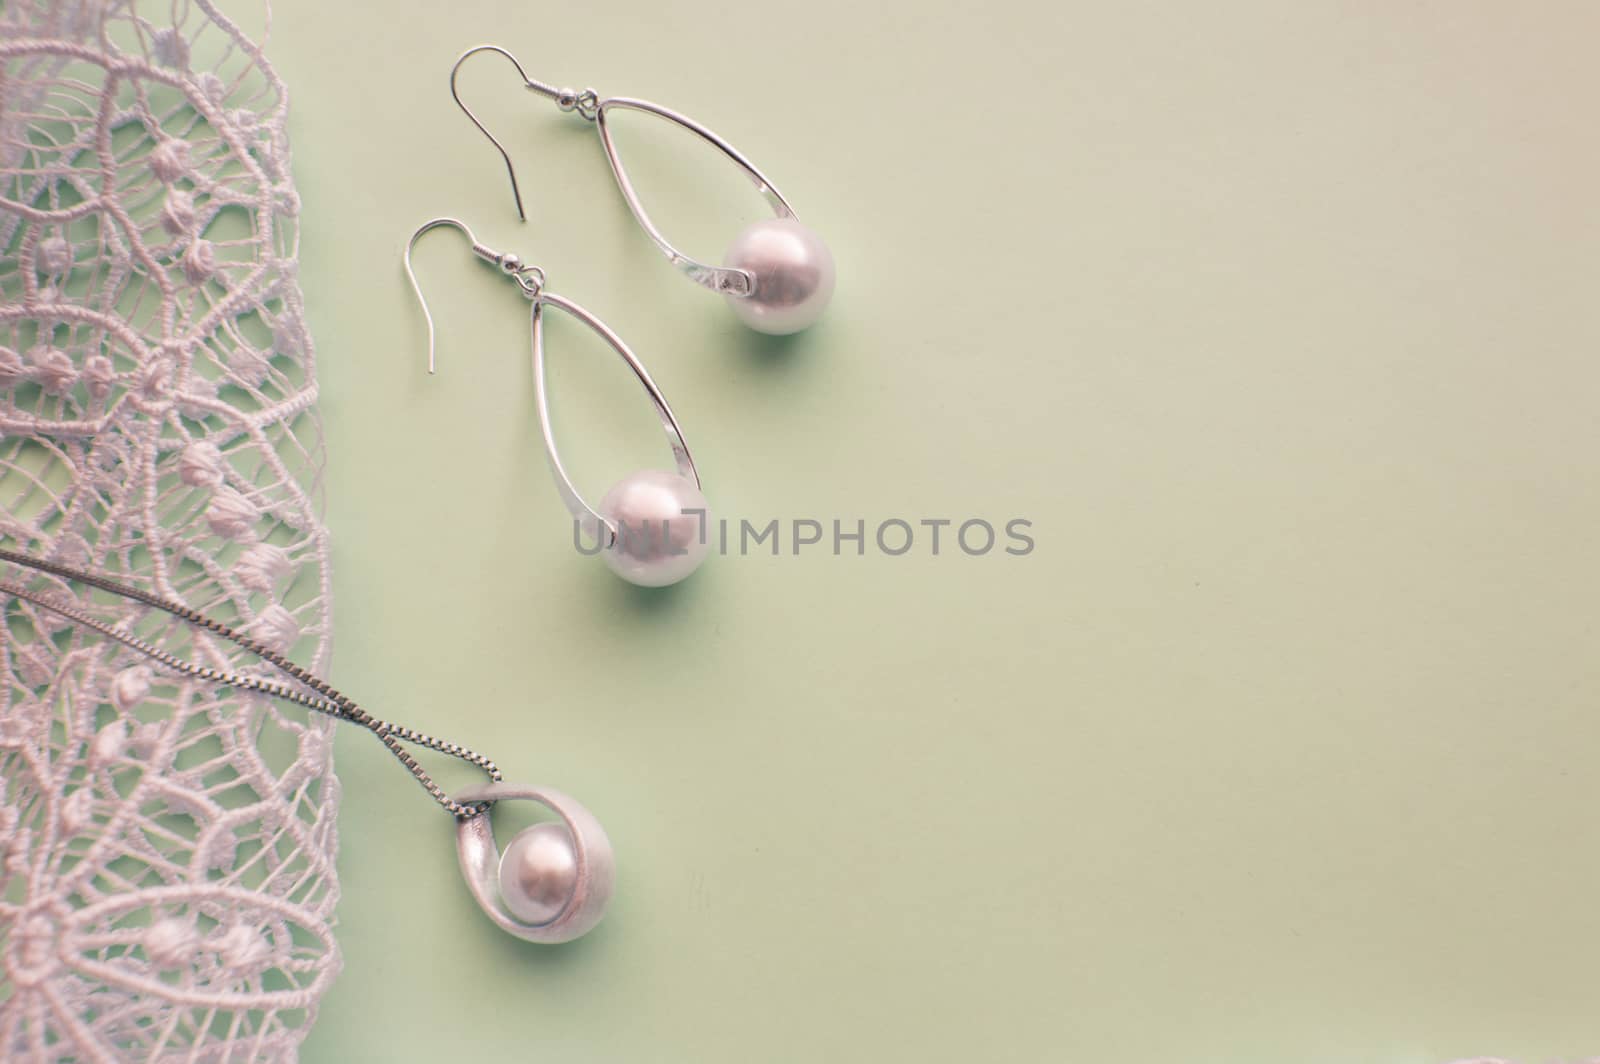 Fashion women's silver accessories - earrings and pendant with pearls on light background with rich openwork lace, top view, flat, space for text.